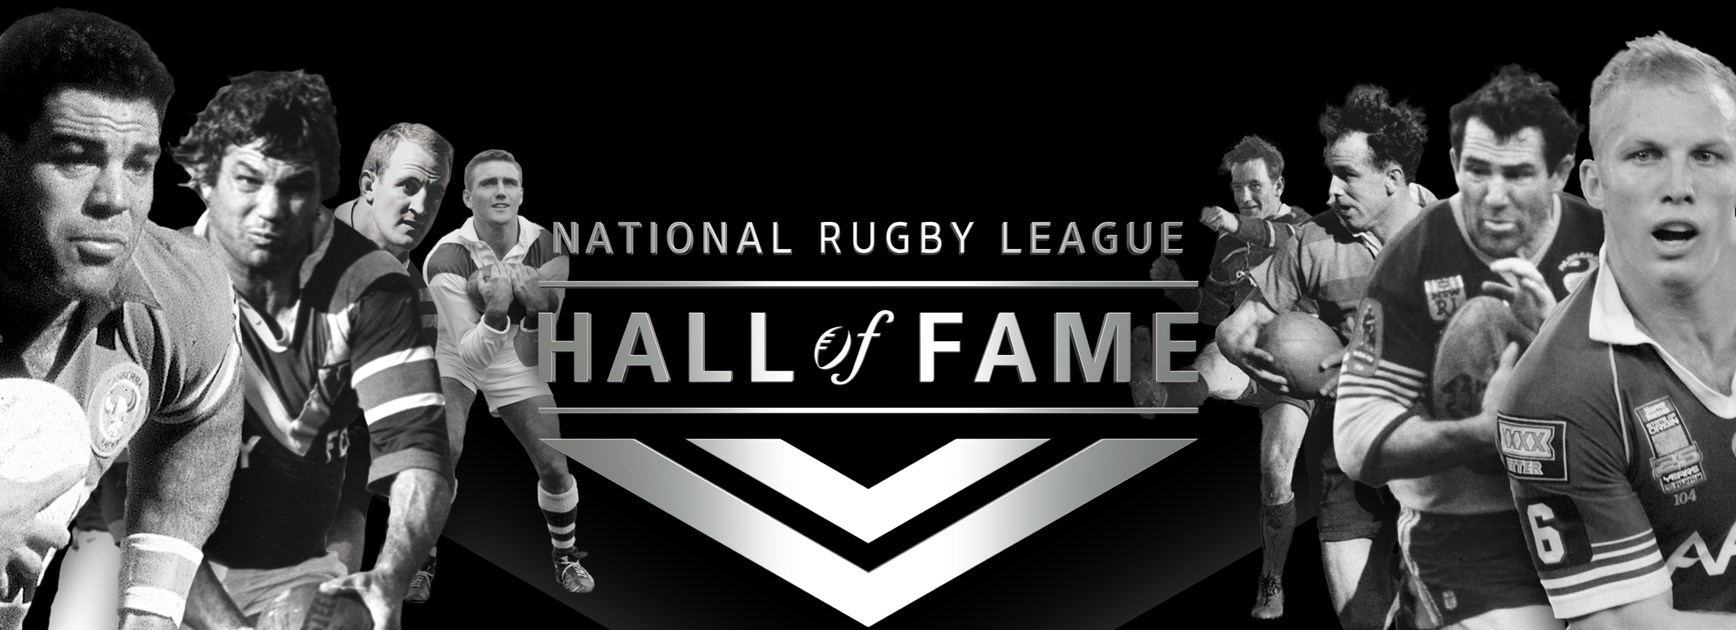 NRL unveils new Immortals and Hall of Fame programs